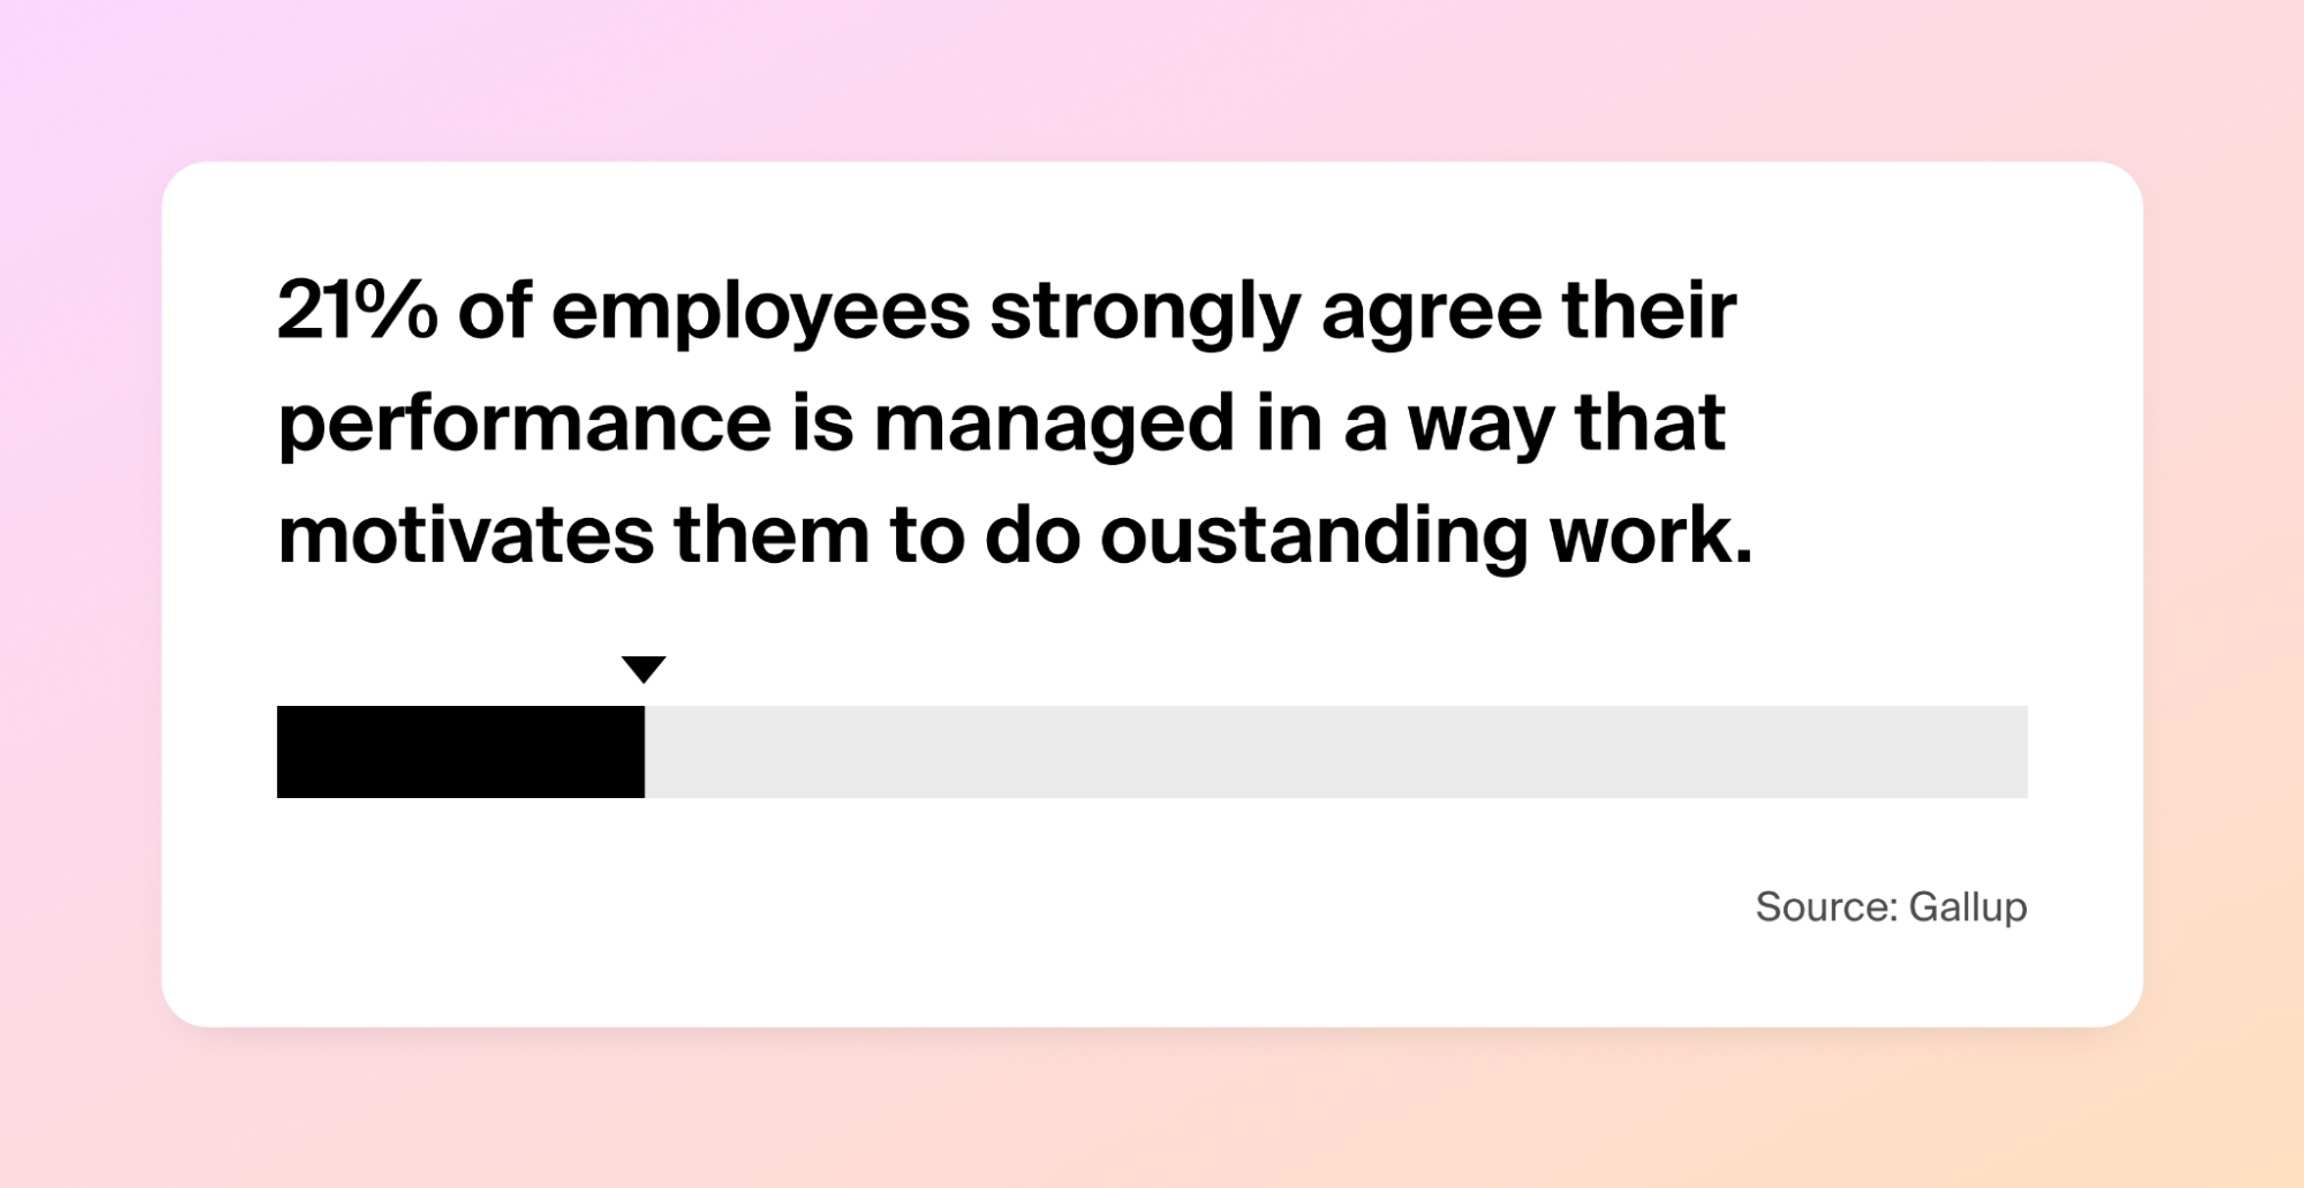 Gallup survey result shows that 21% of employees strongly agree their performance is managed in a way that motivates them to do outstanding work